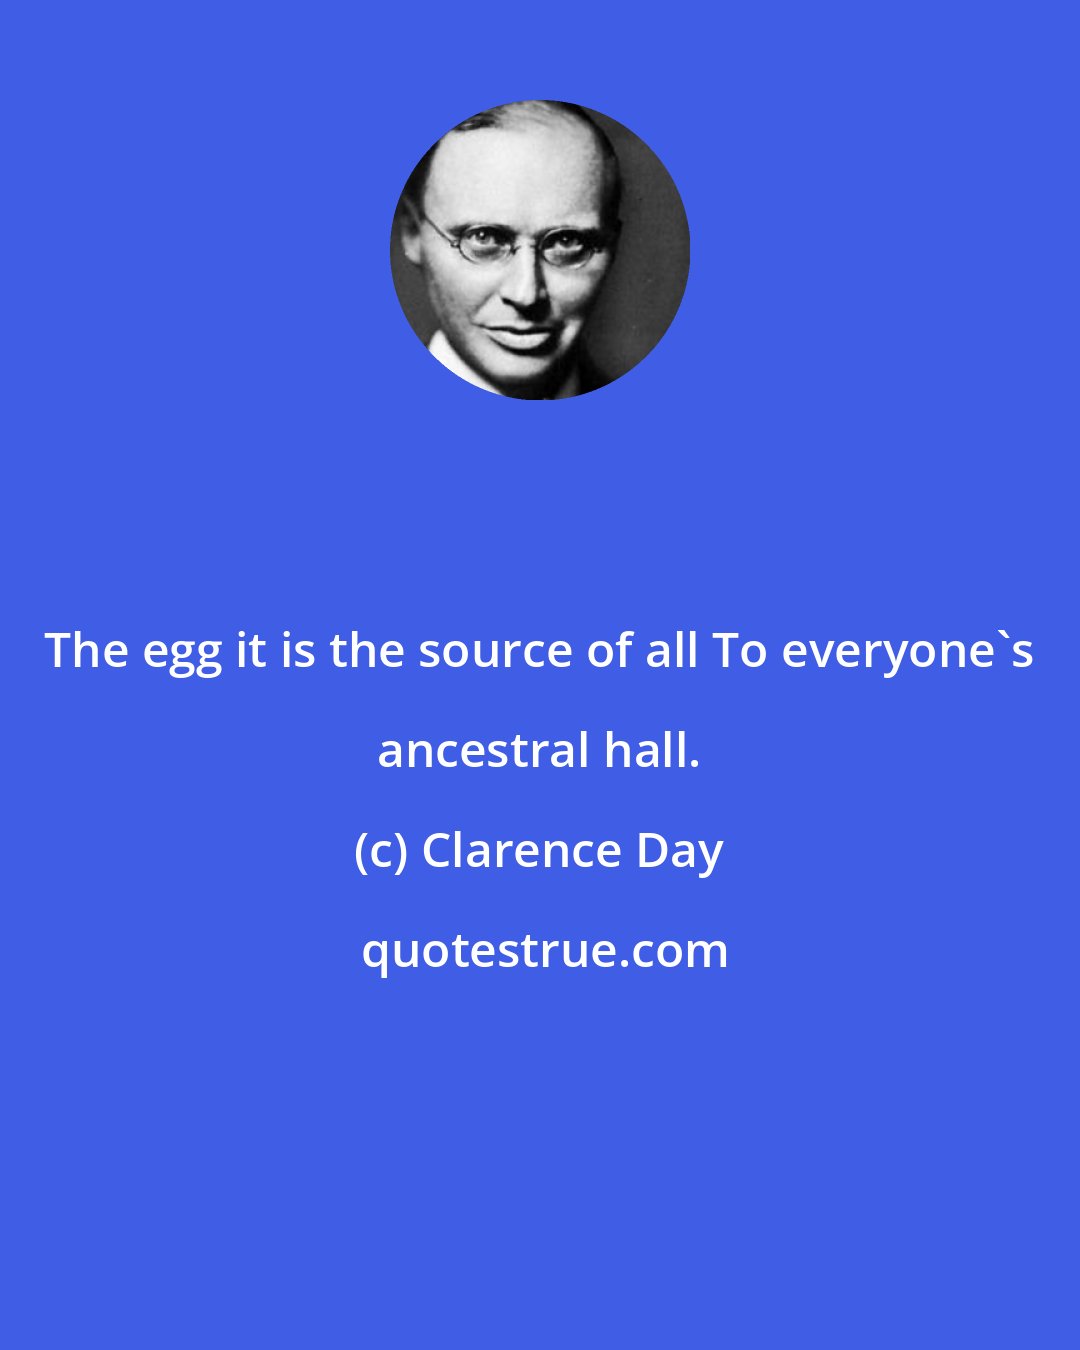 Clarence Day: The egg it is the source of all To everyone's ancestral hall.